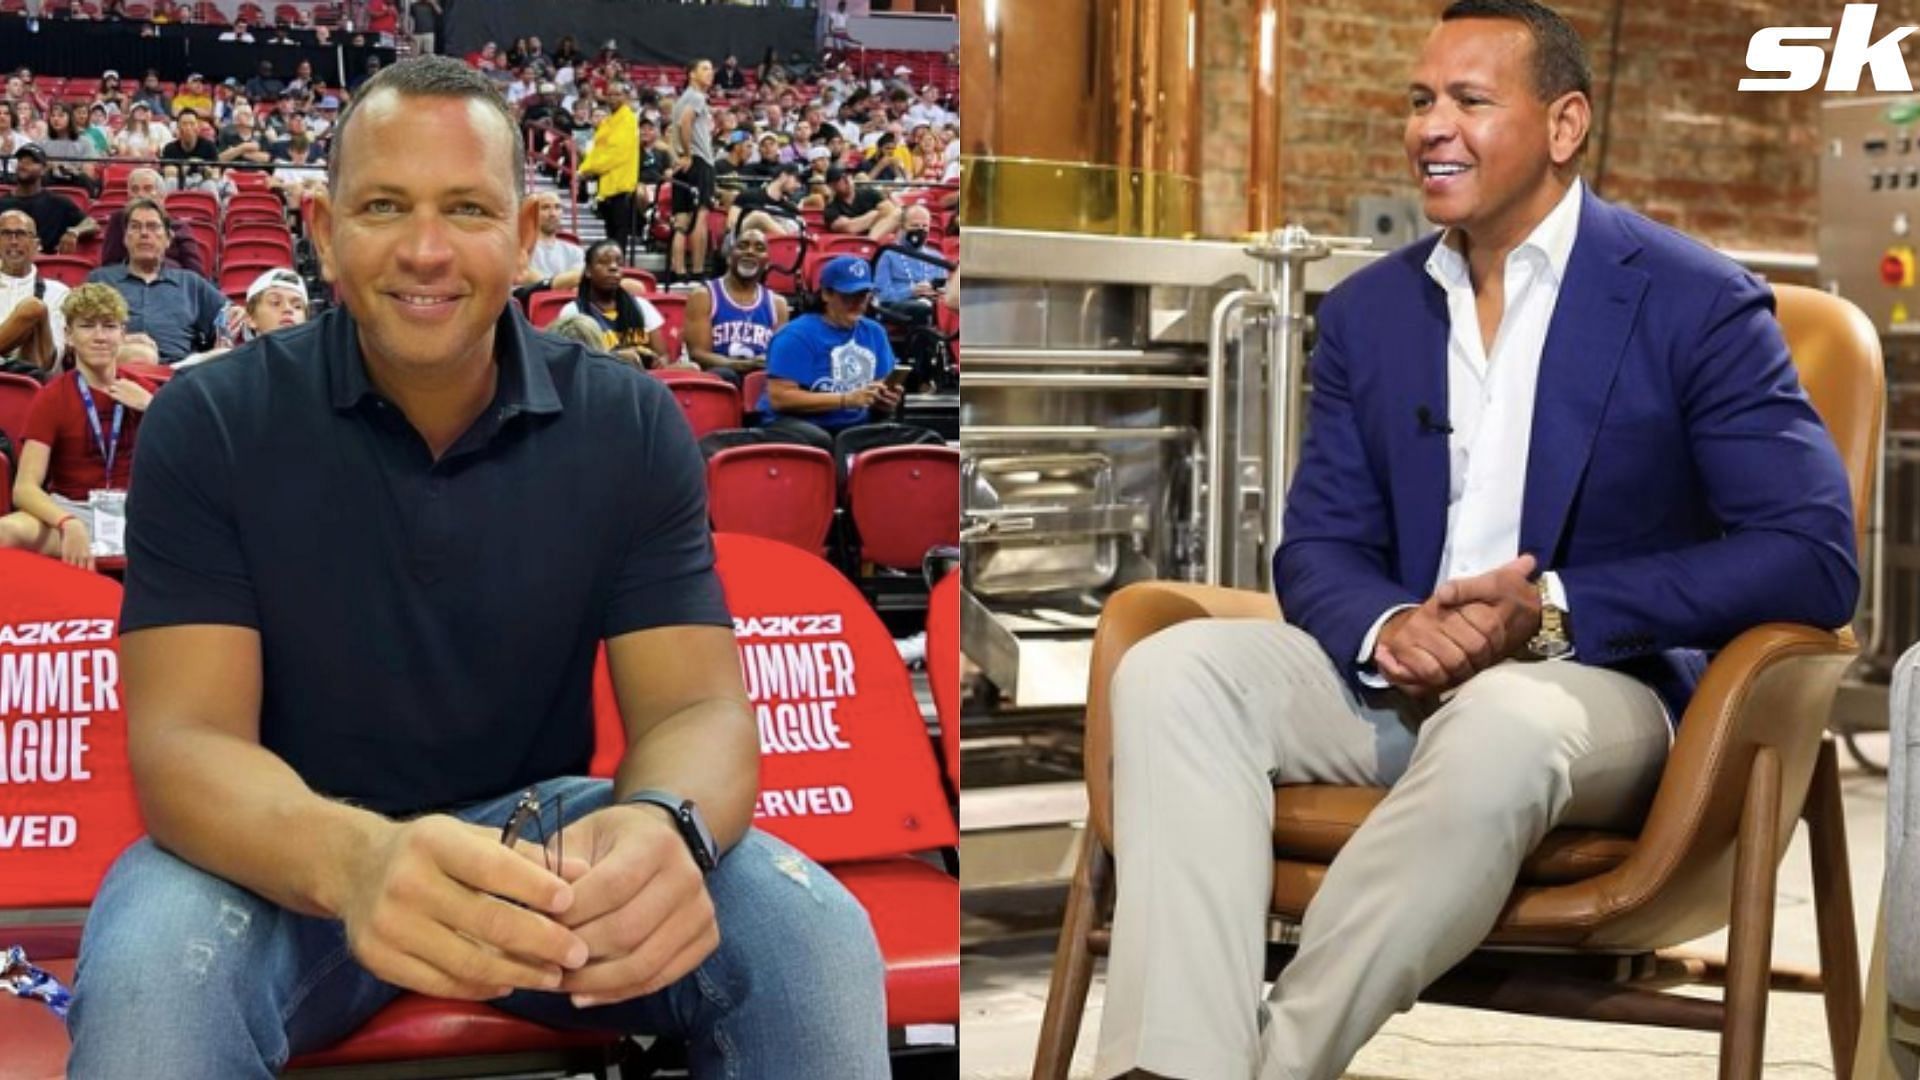 In Photos: Alex Rodriguez flaunts luxury Rolex watch worth $87,070 at charity event for Cuyahoga Community College students